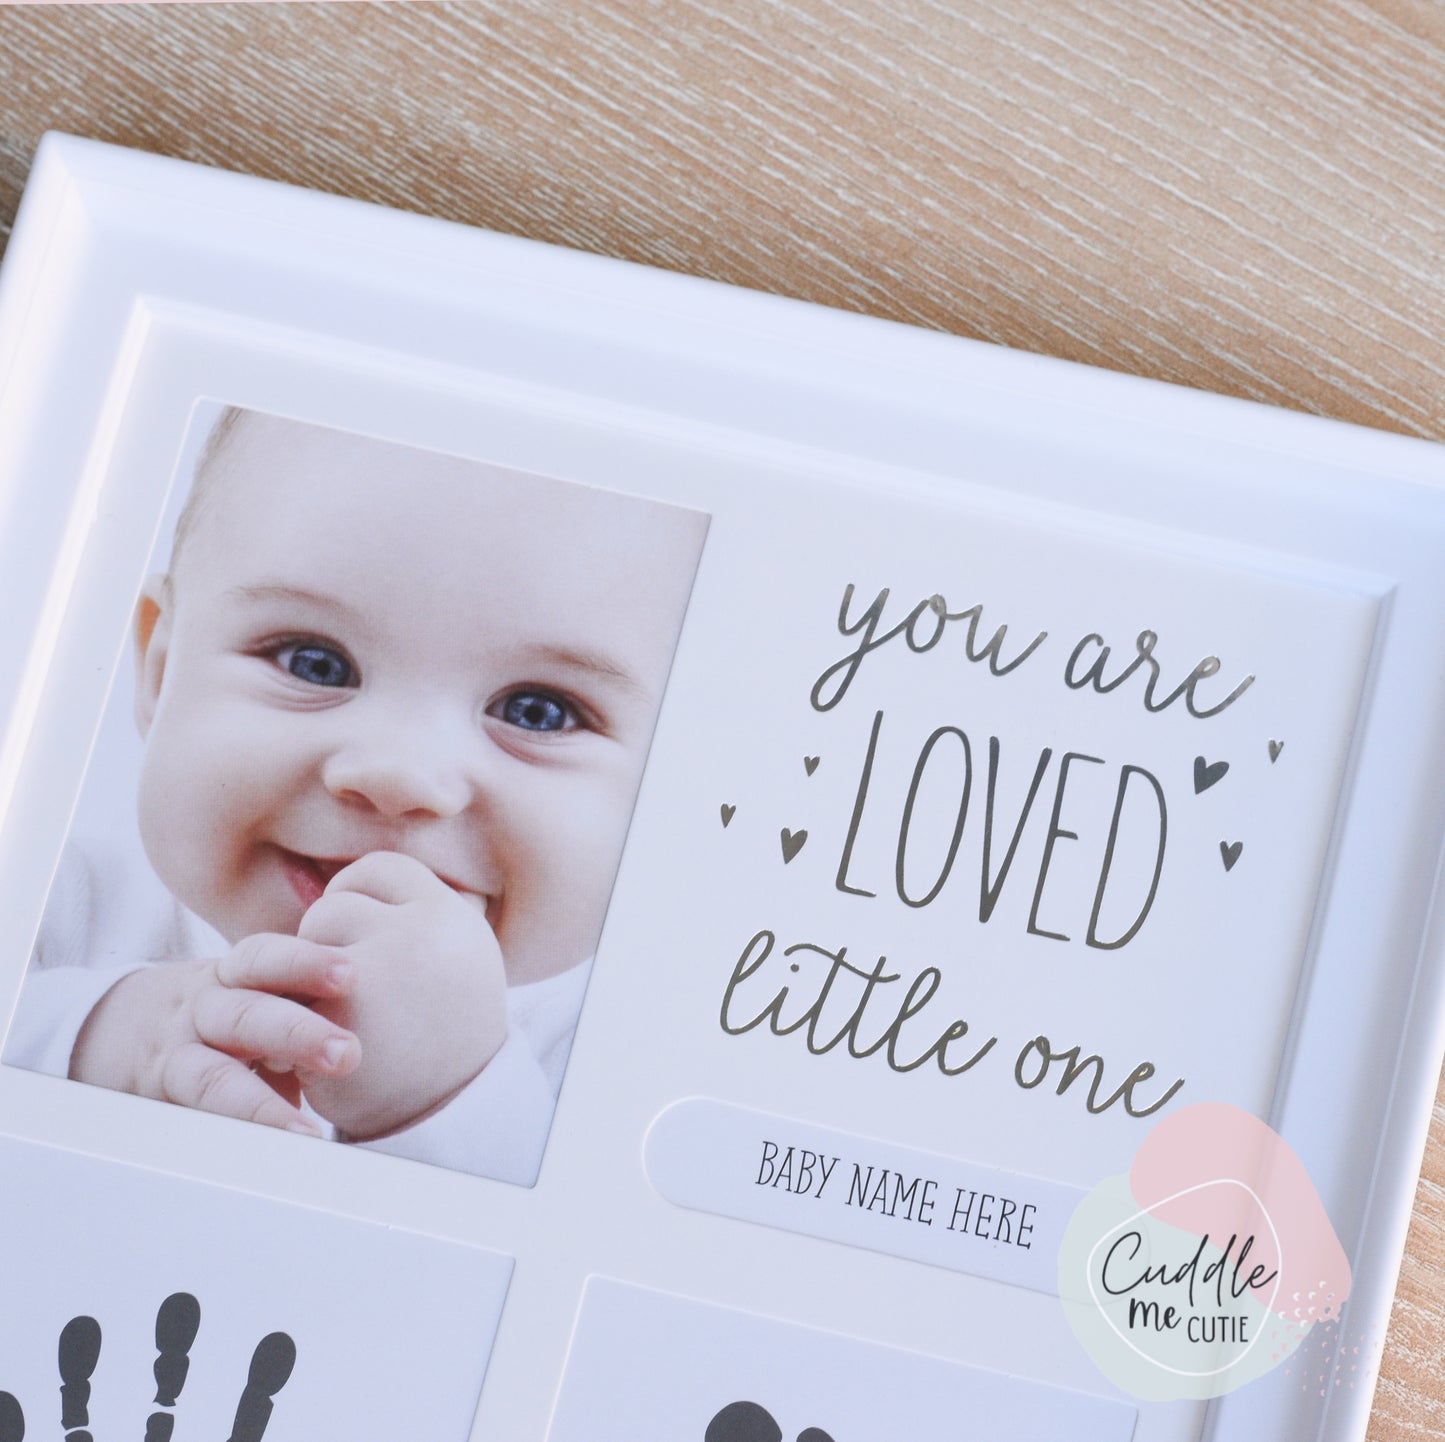 Foot and Handprint Photo Frame